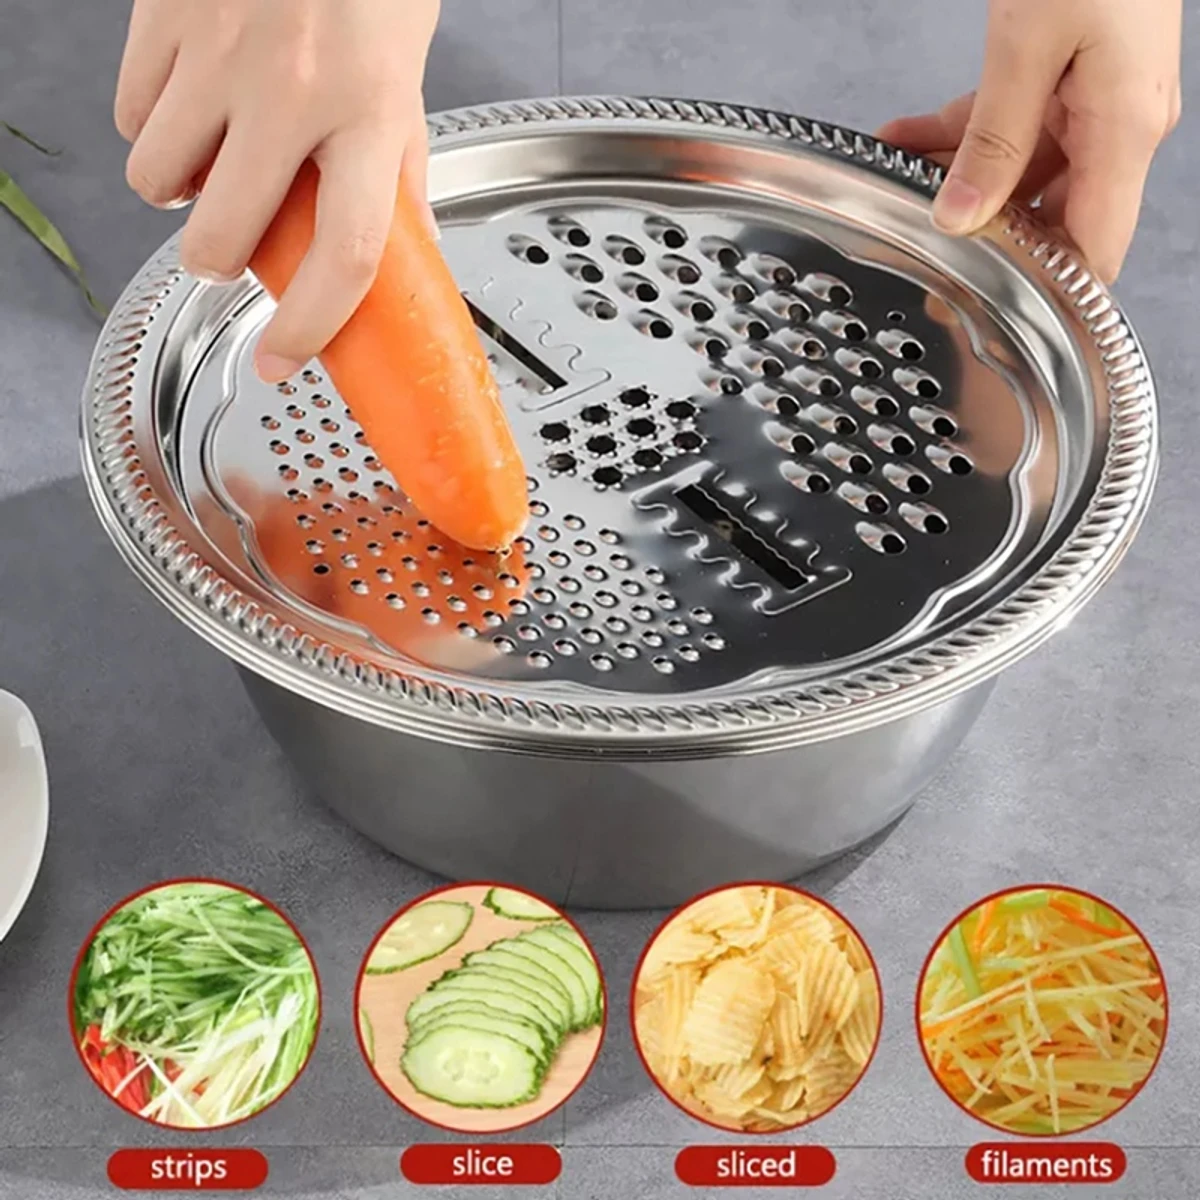 singslife Stainless Steel Basin with Grater Multifunctional Drain Basket with Vegetable Cutter 3 in 1 Cheese Grater with Drain Basin for Washing Vegetables Fruits Salad Maker Bowl